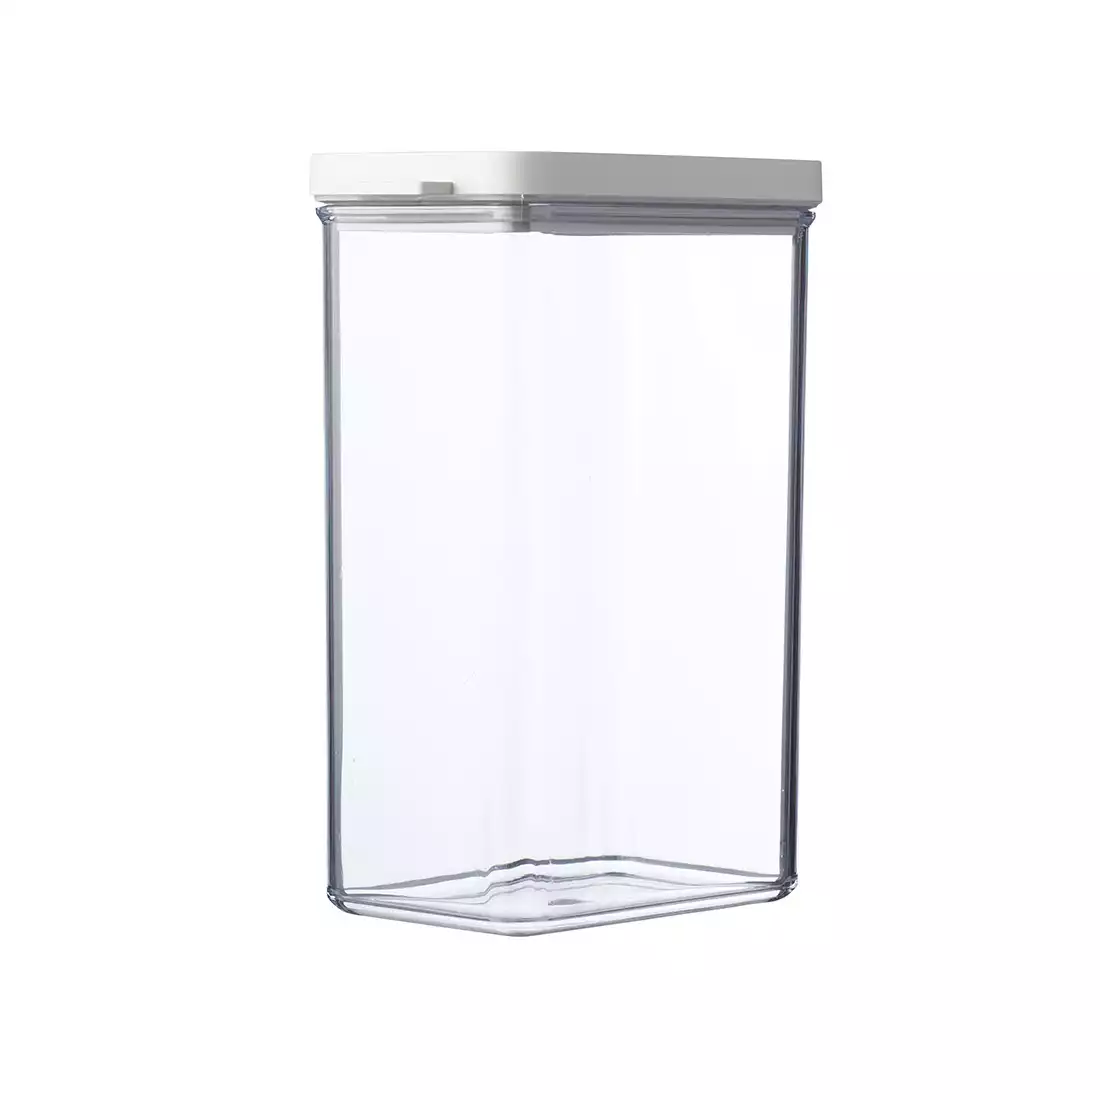 MEPAL OMNIA food container 2000 ml, white